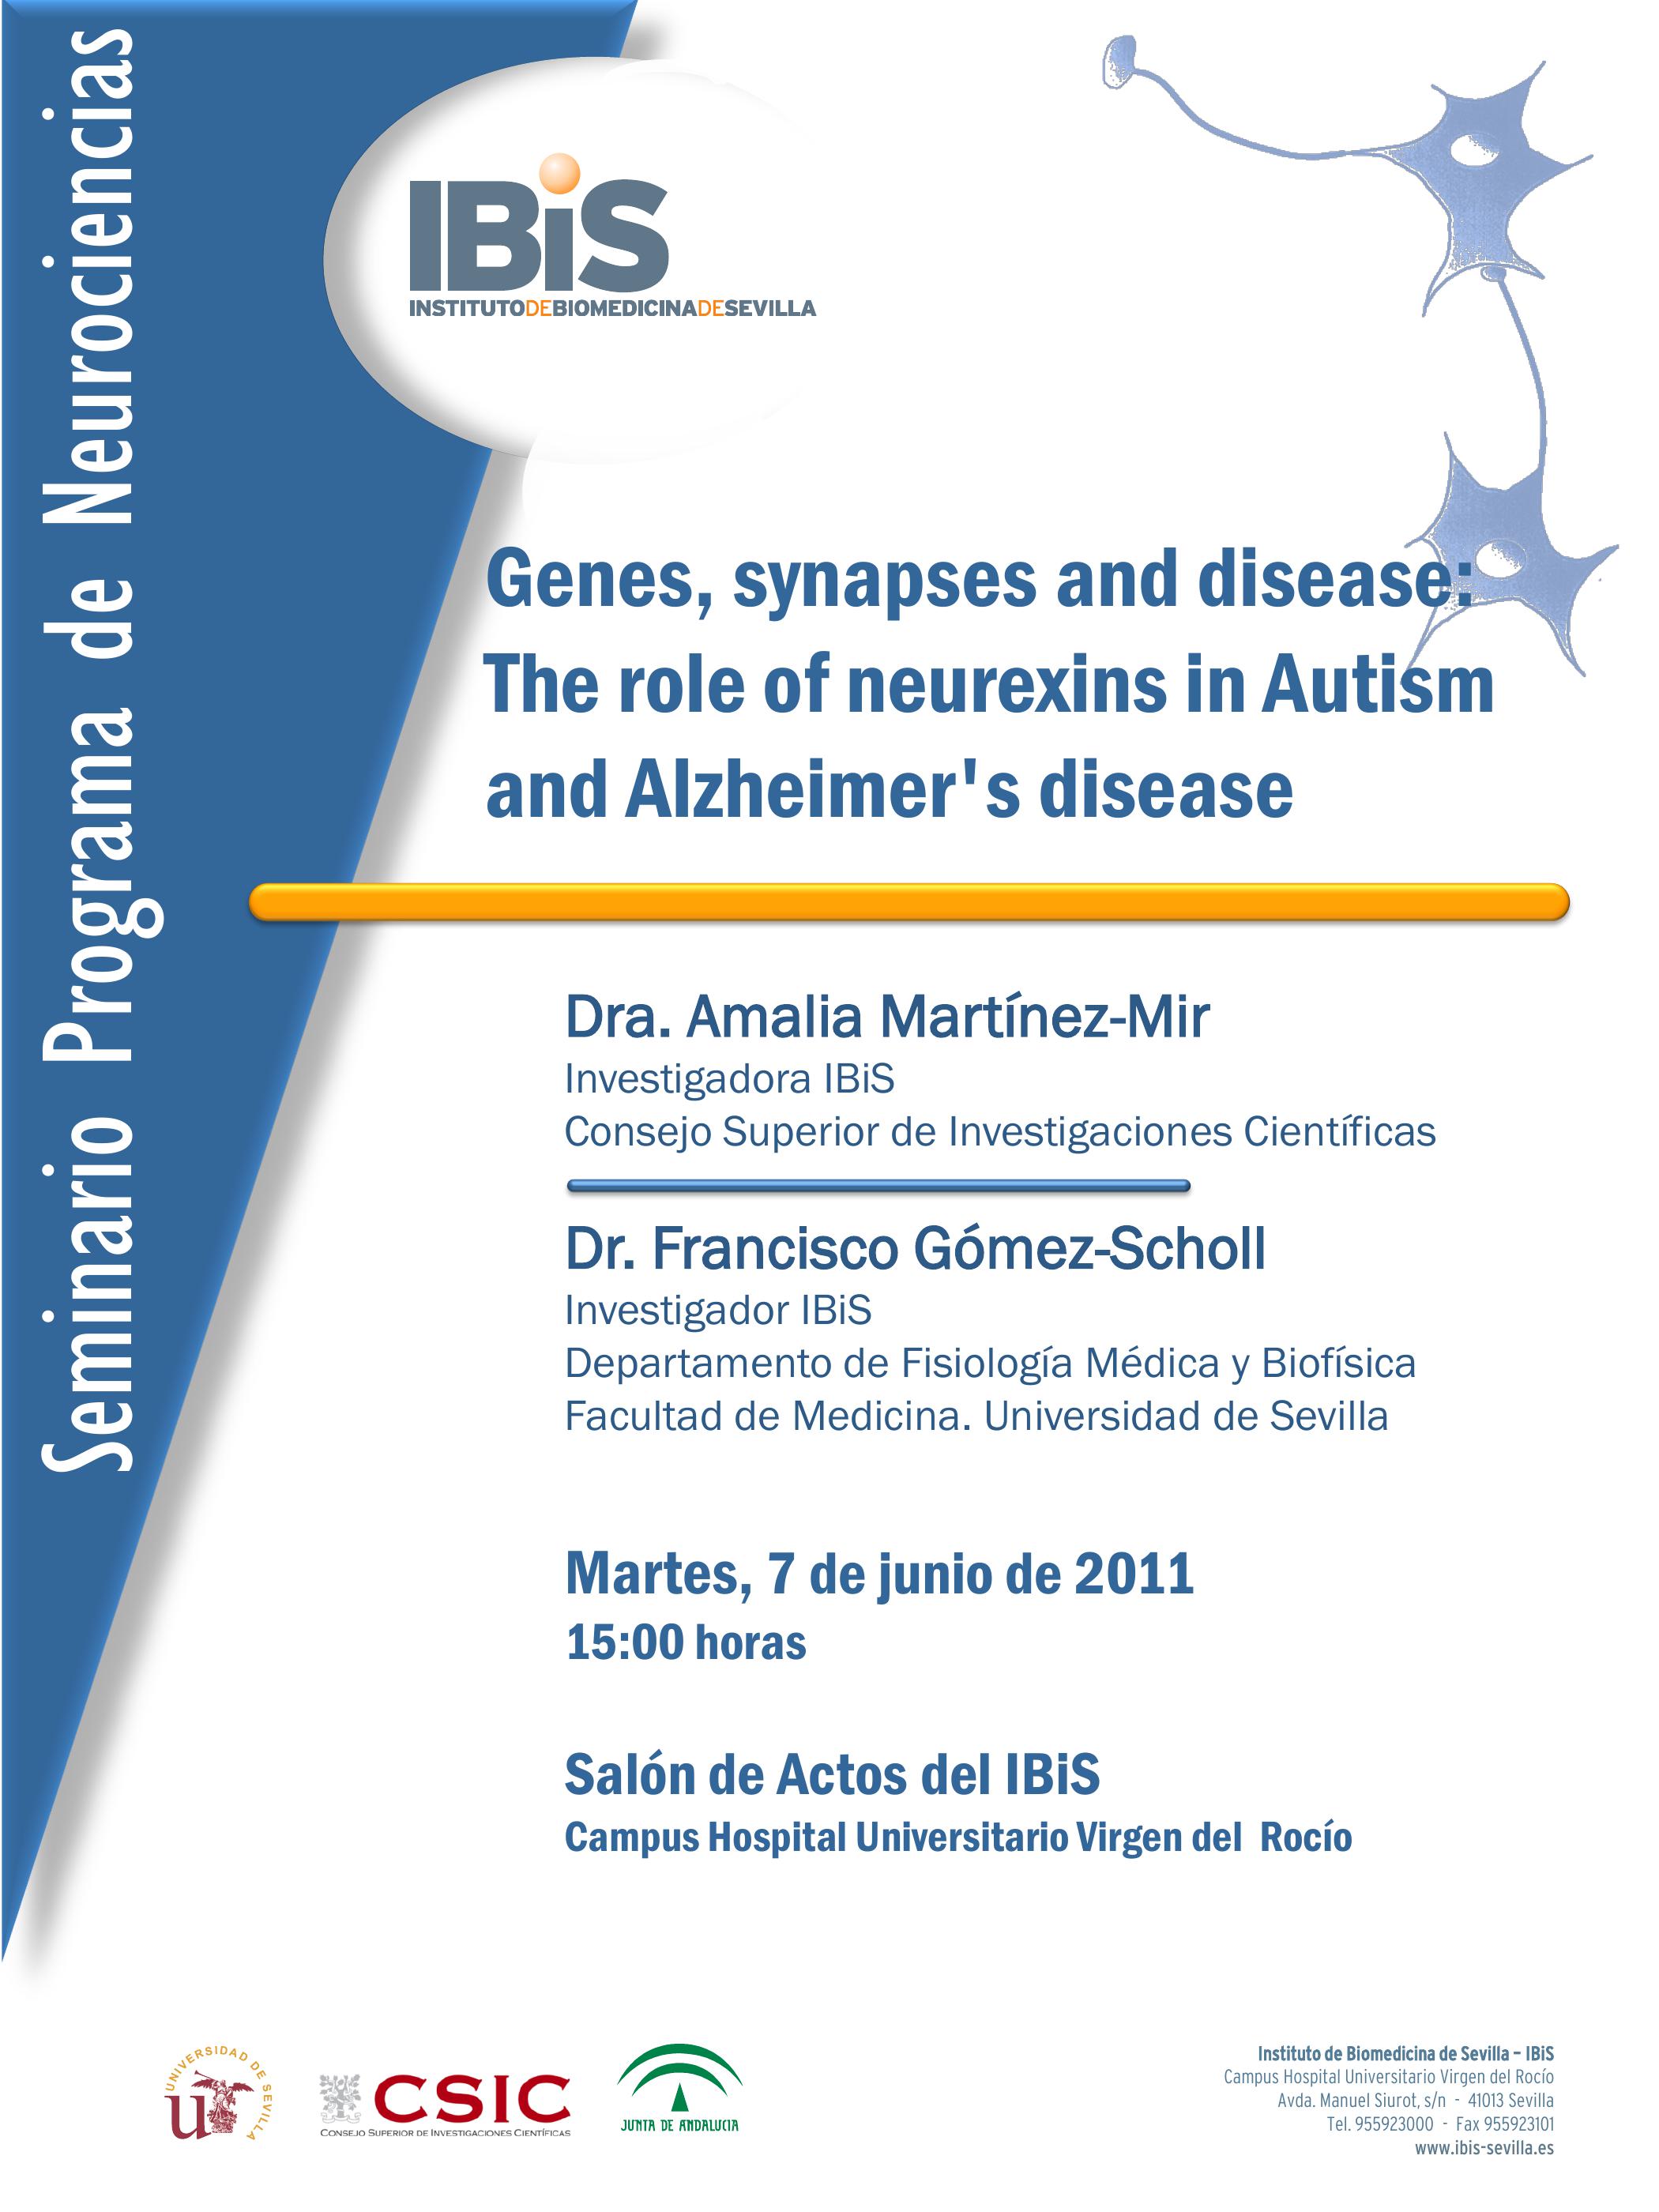 Poster: Genes, synapses and disease: The role of neurexins in Autism and Alzheimer's disease